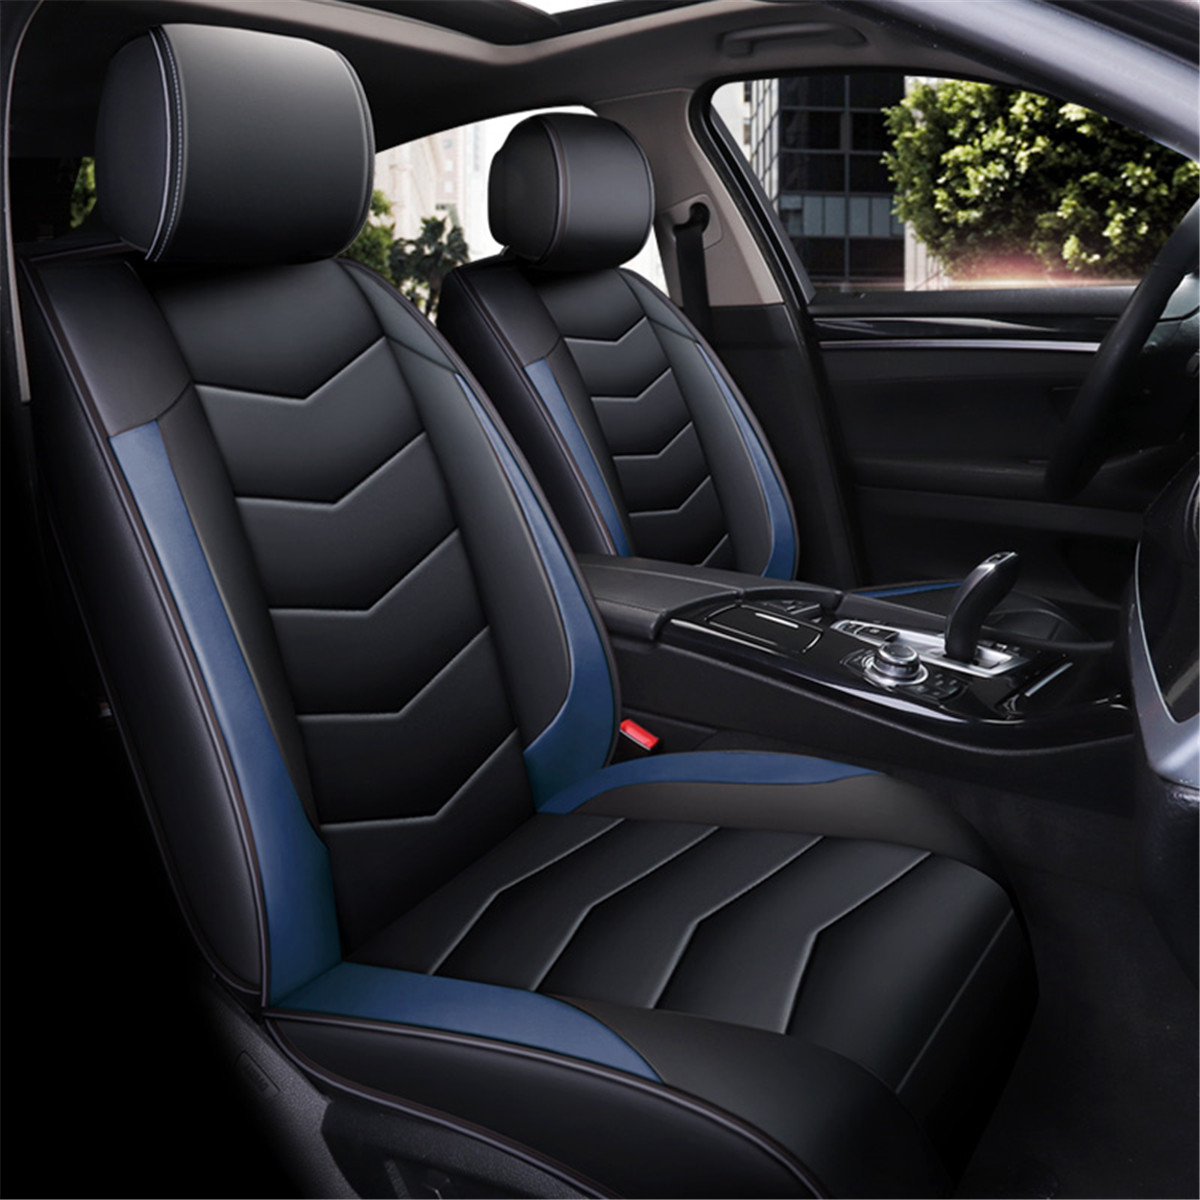 Seat Covers - Universal Deluxe Leather 5 Seats Car Front Seat Cover